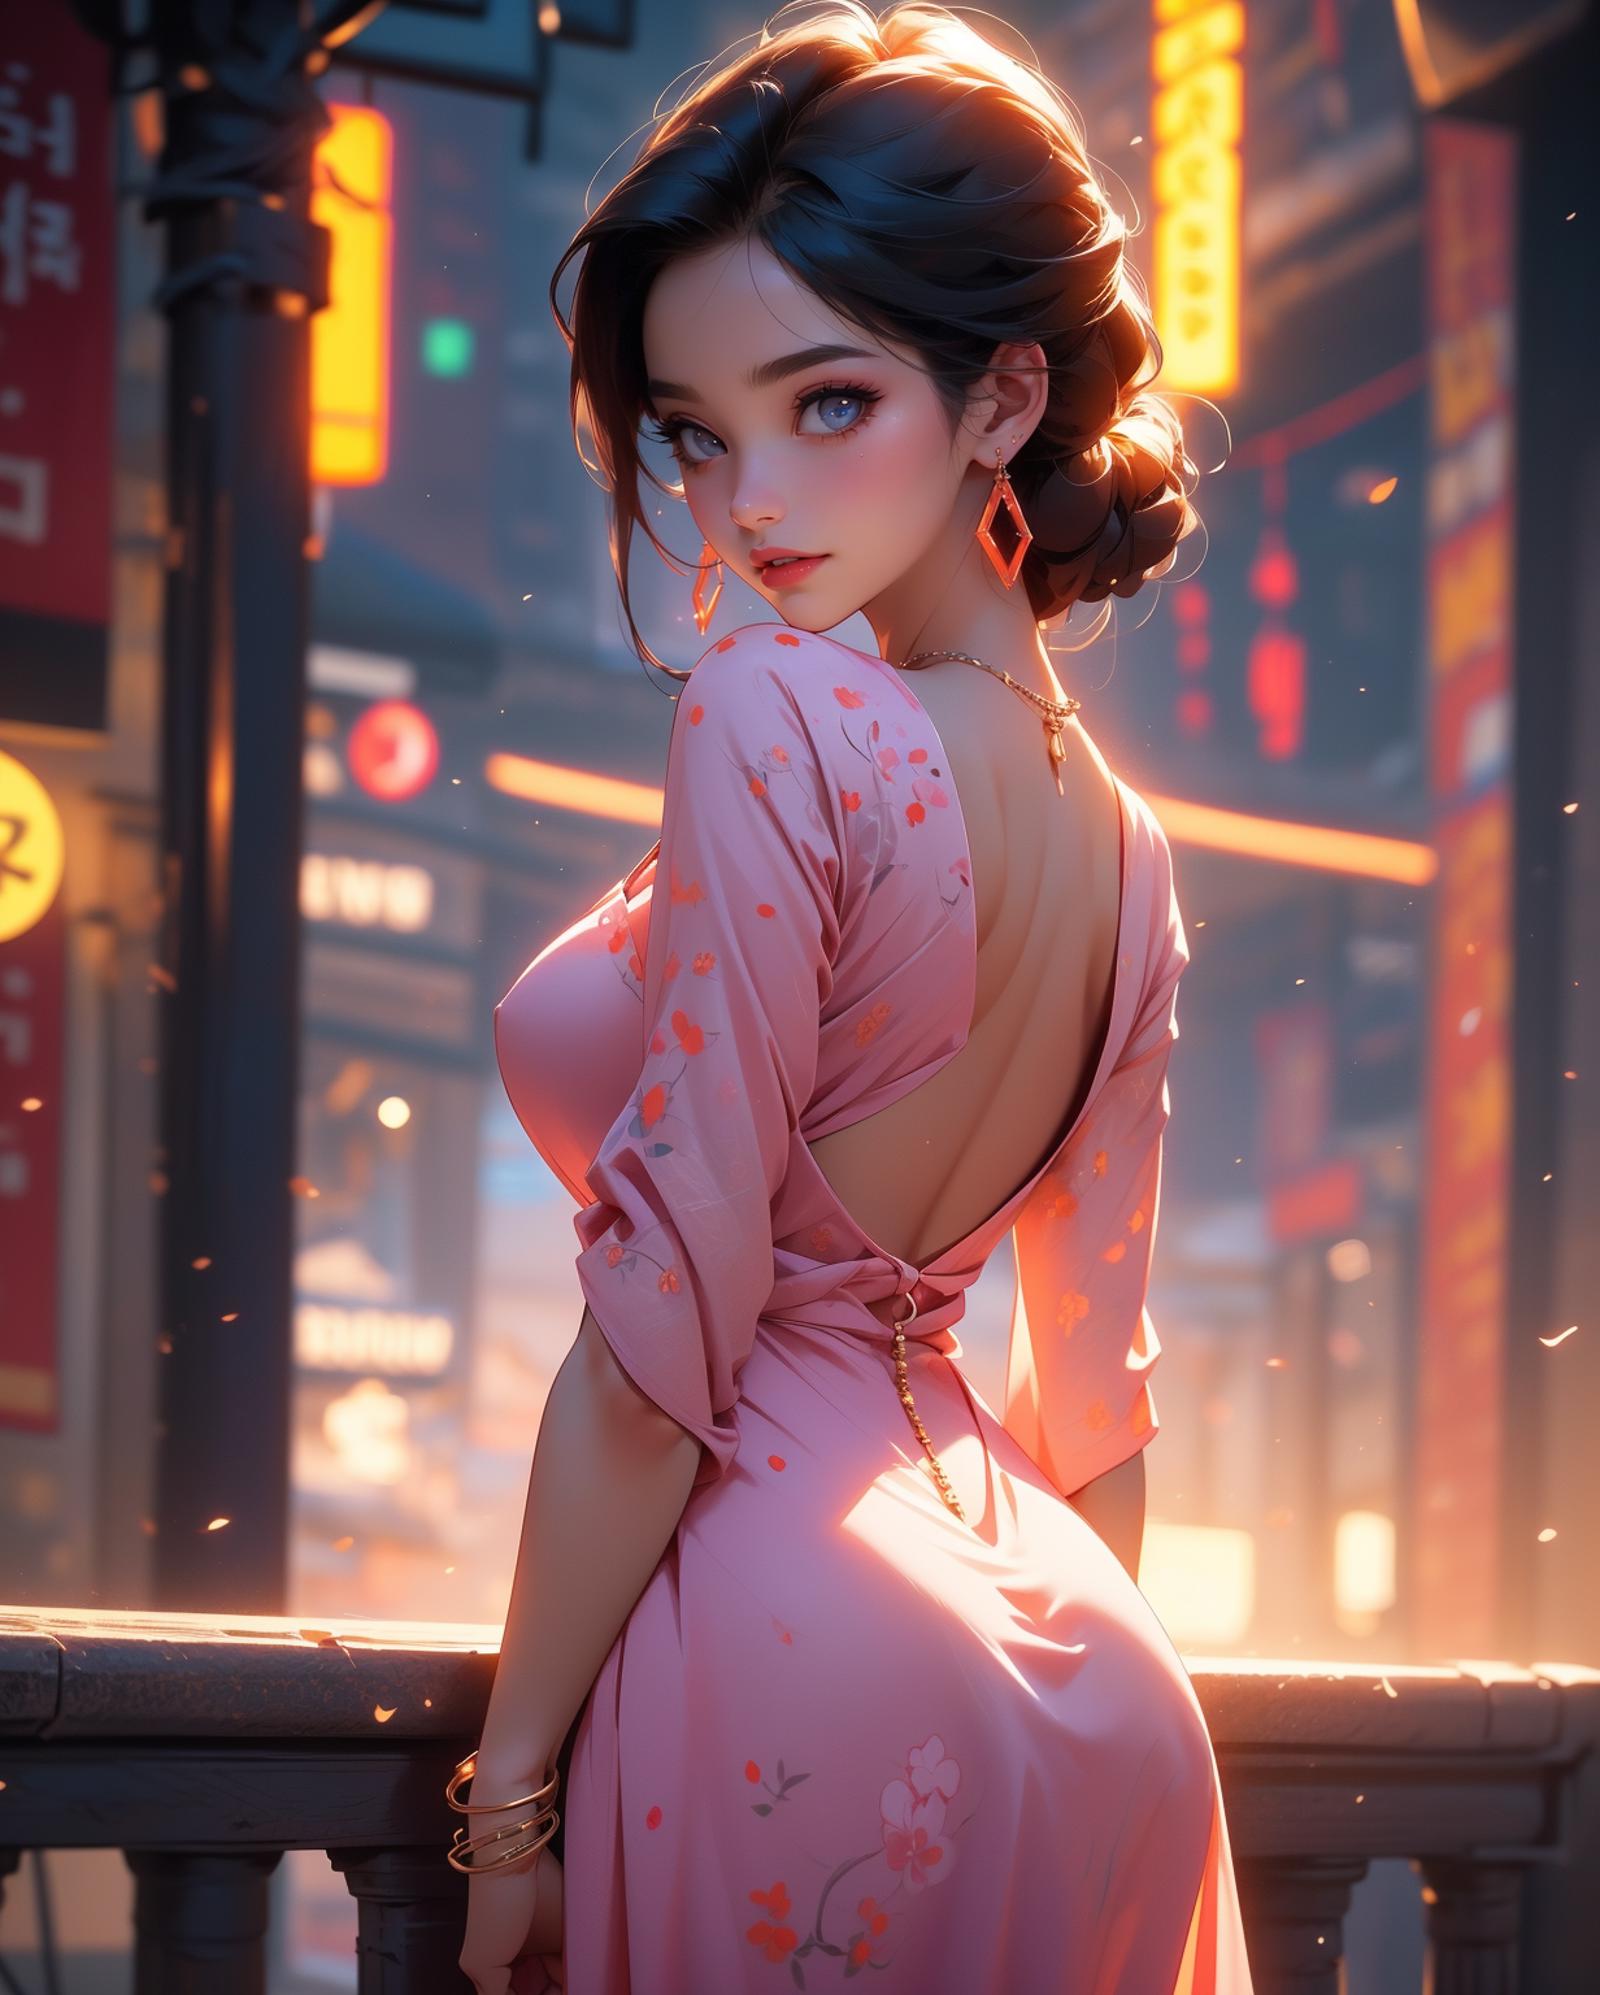 A 3D rendered female character wearing a pink dress.